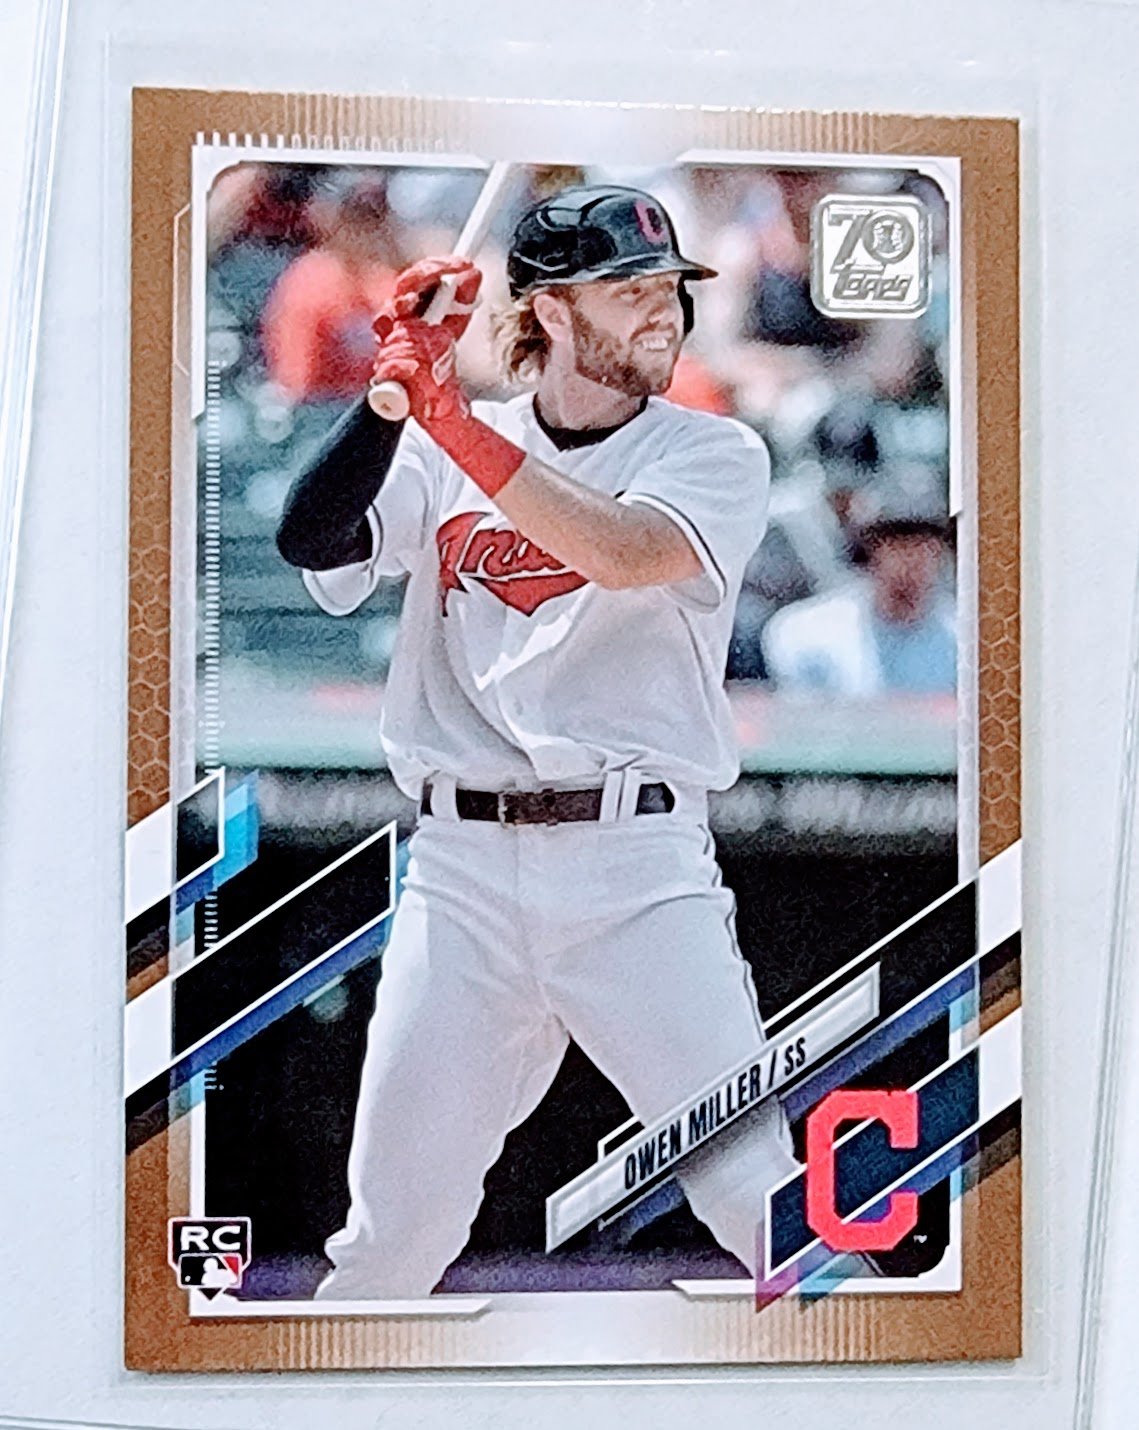 2021 Topps Update Joey Miller #'d/2021 Gold Bordered Baseball Card AVM1 simple Xclusive Collectibles   